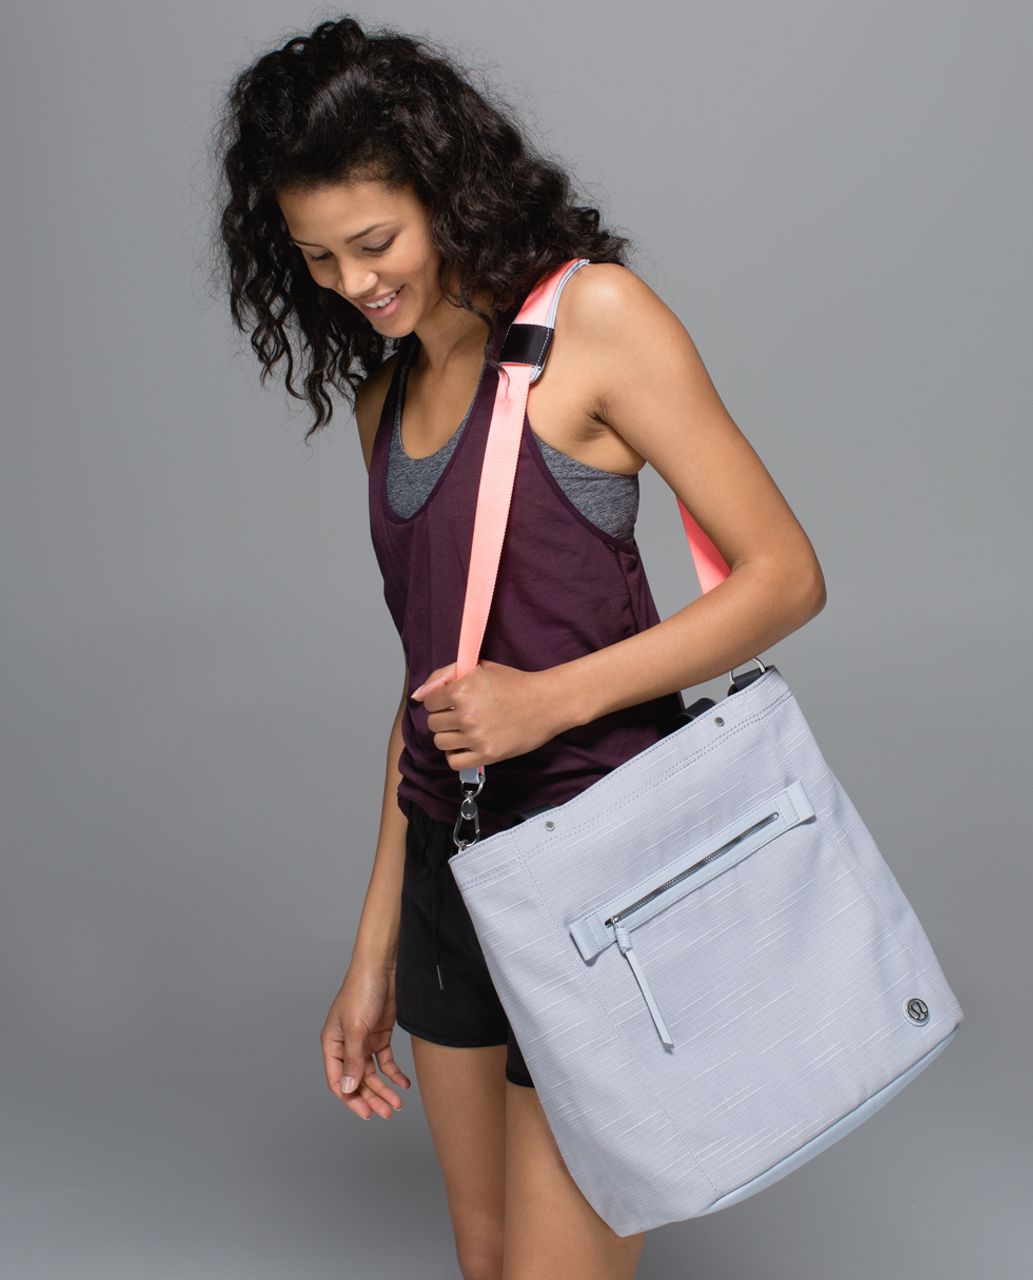 Lululemon Out & About Tote - Silver Fox / White / Silver Fox / Deep Coal